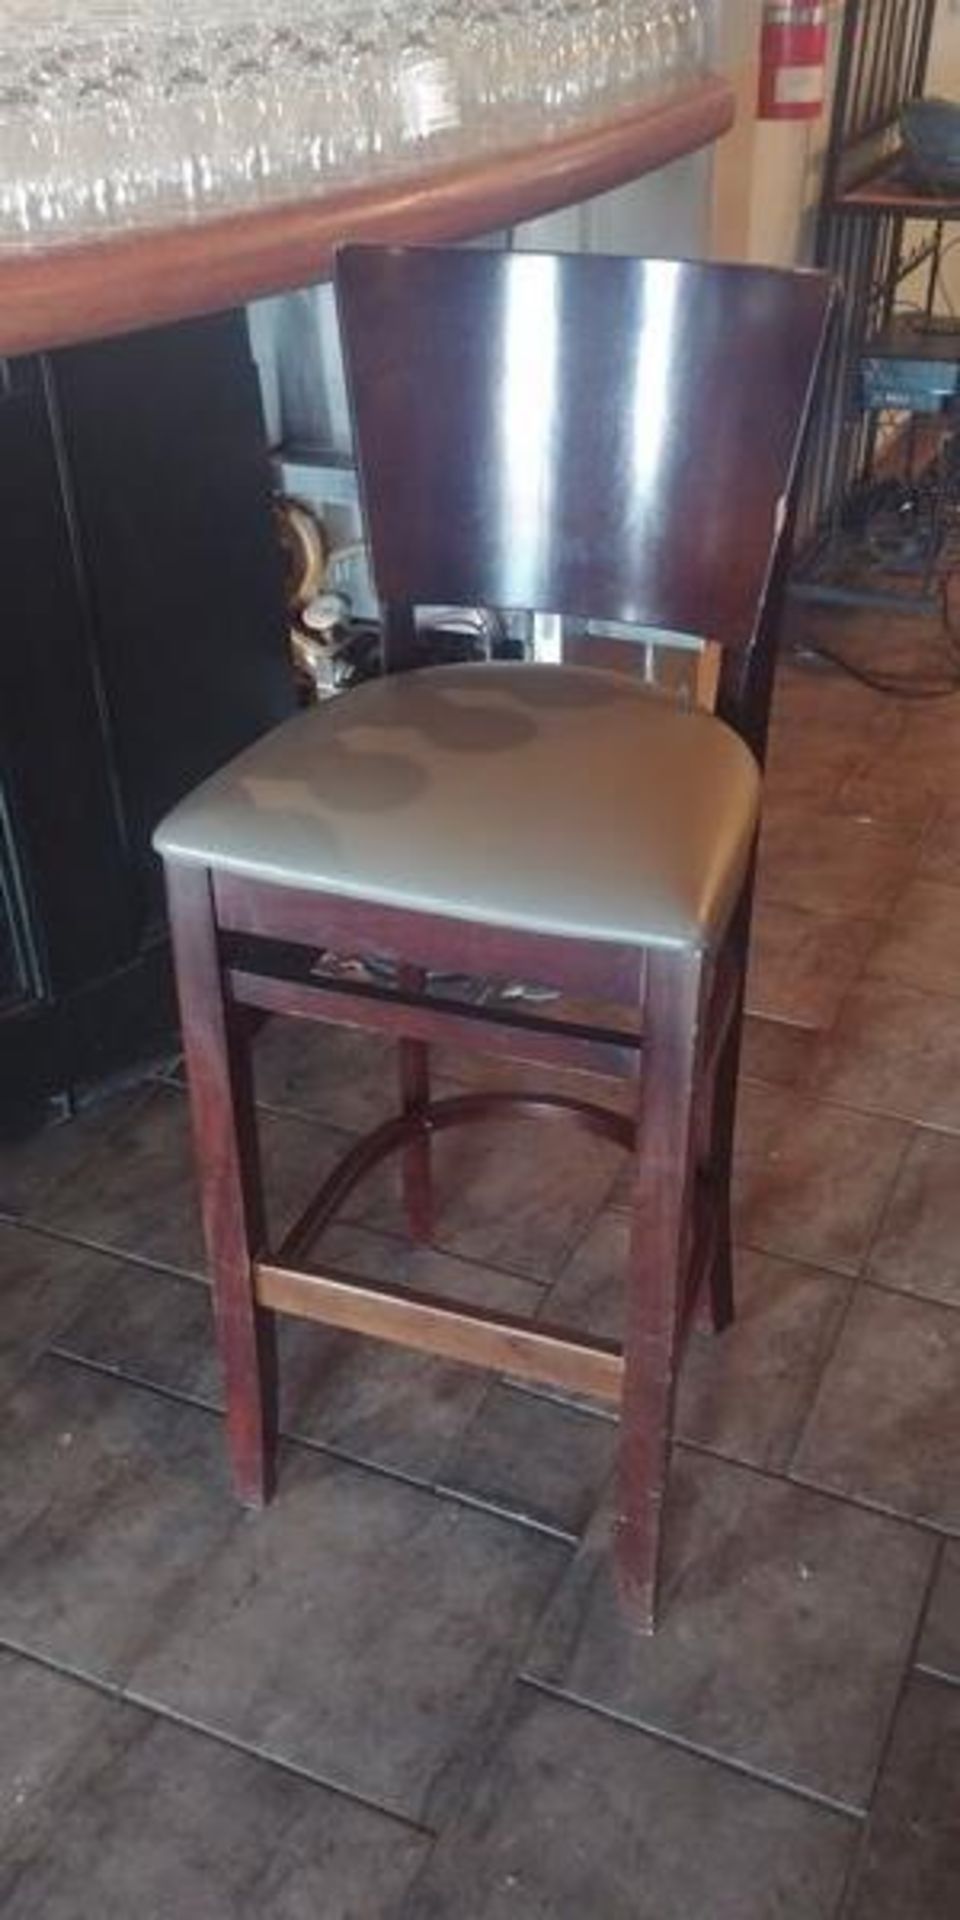 2 Padded Bentwood Bar Stools - Price Each times 2